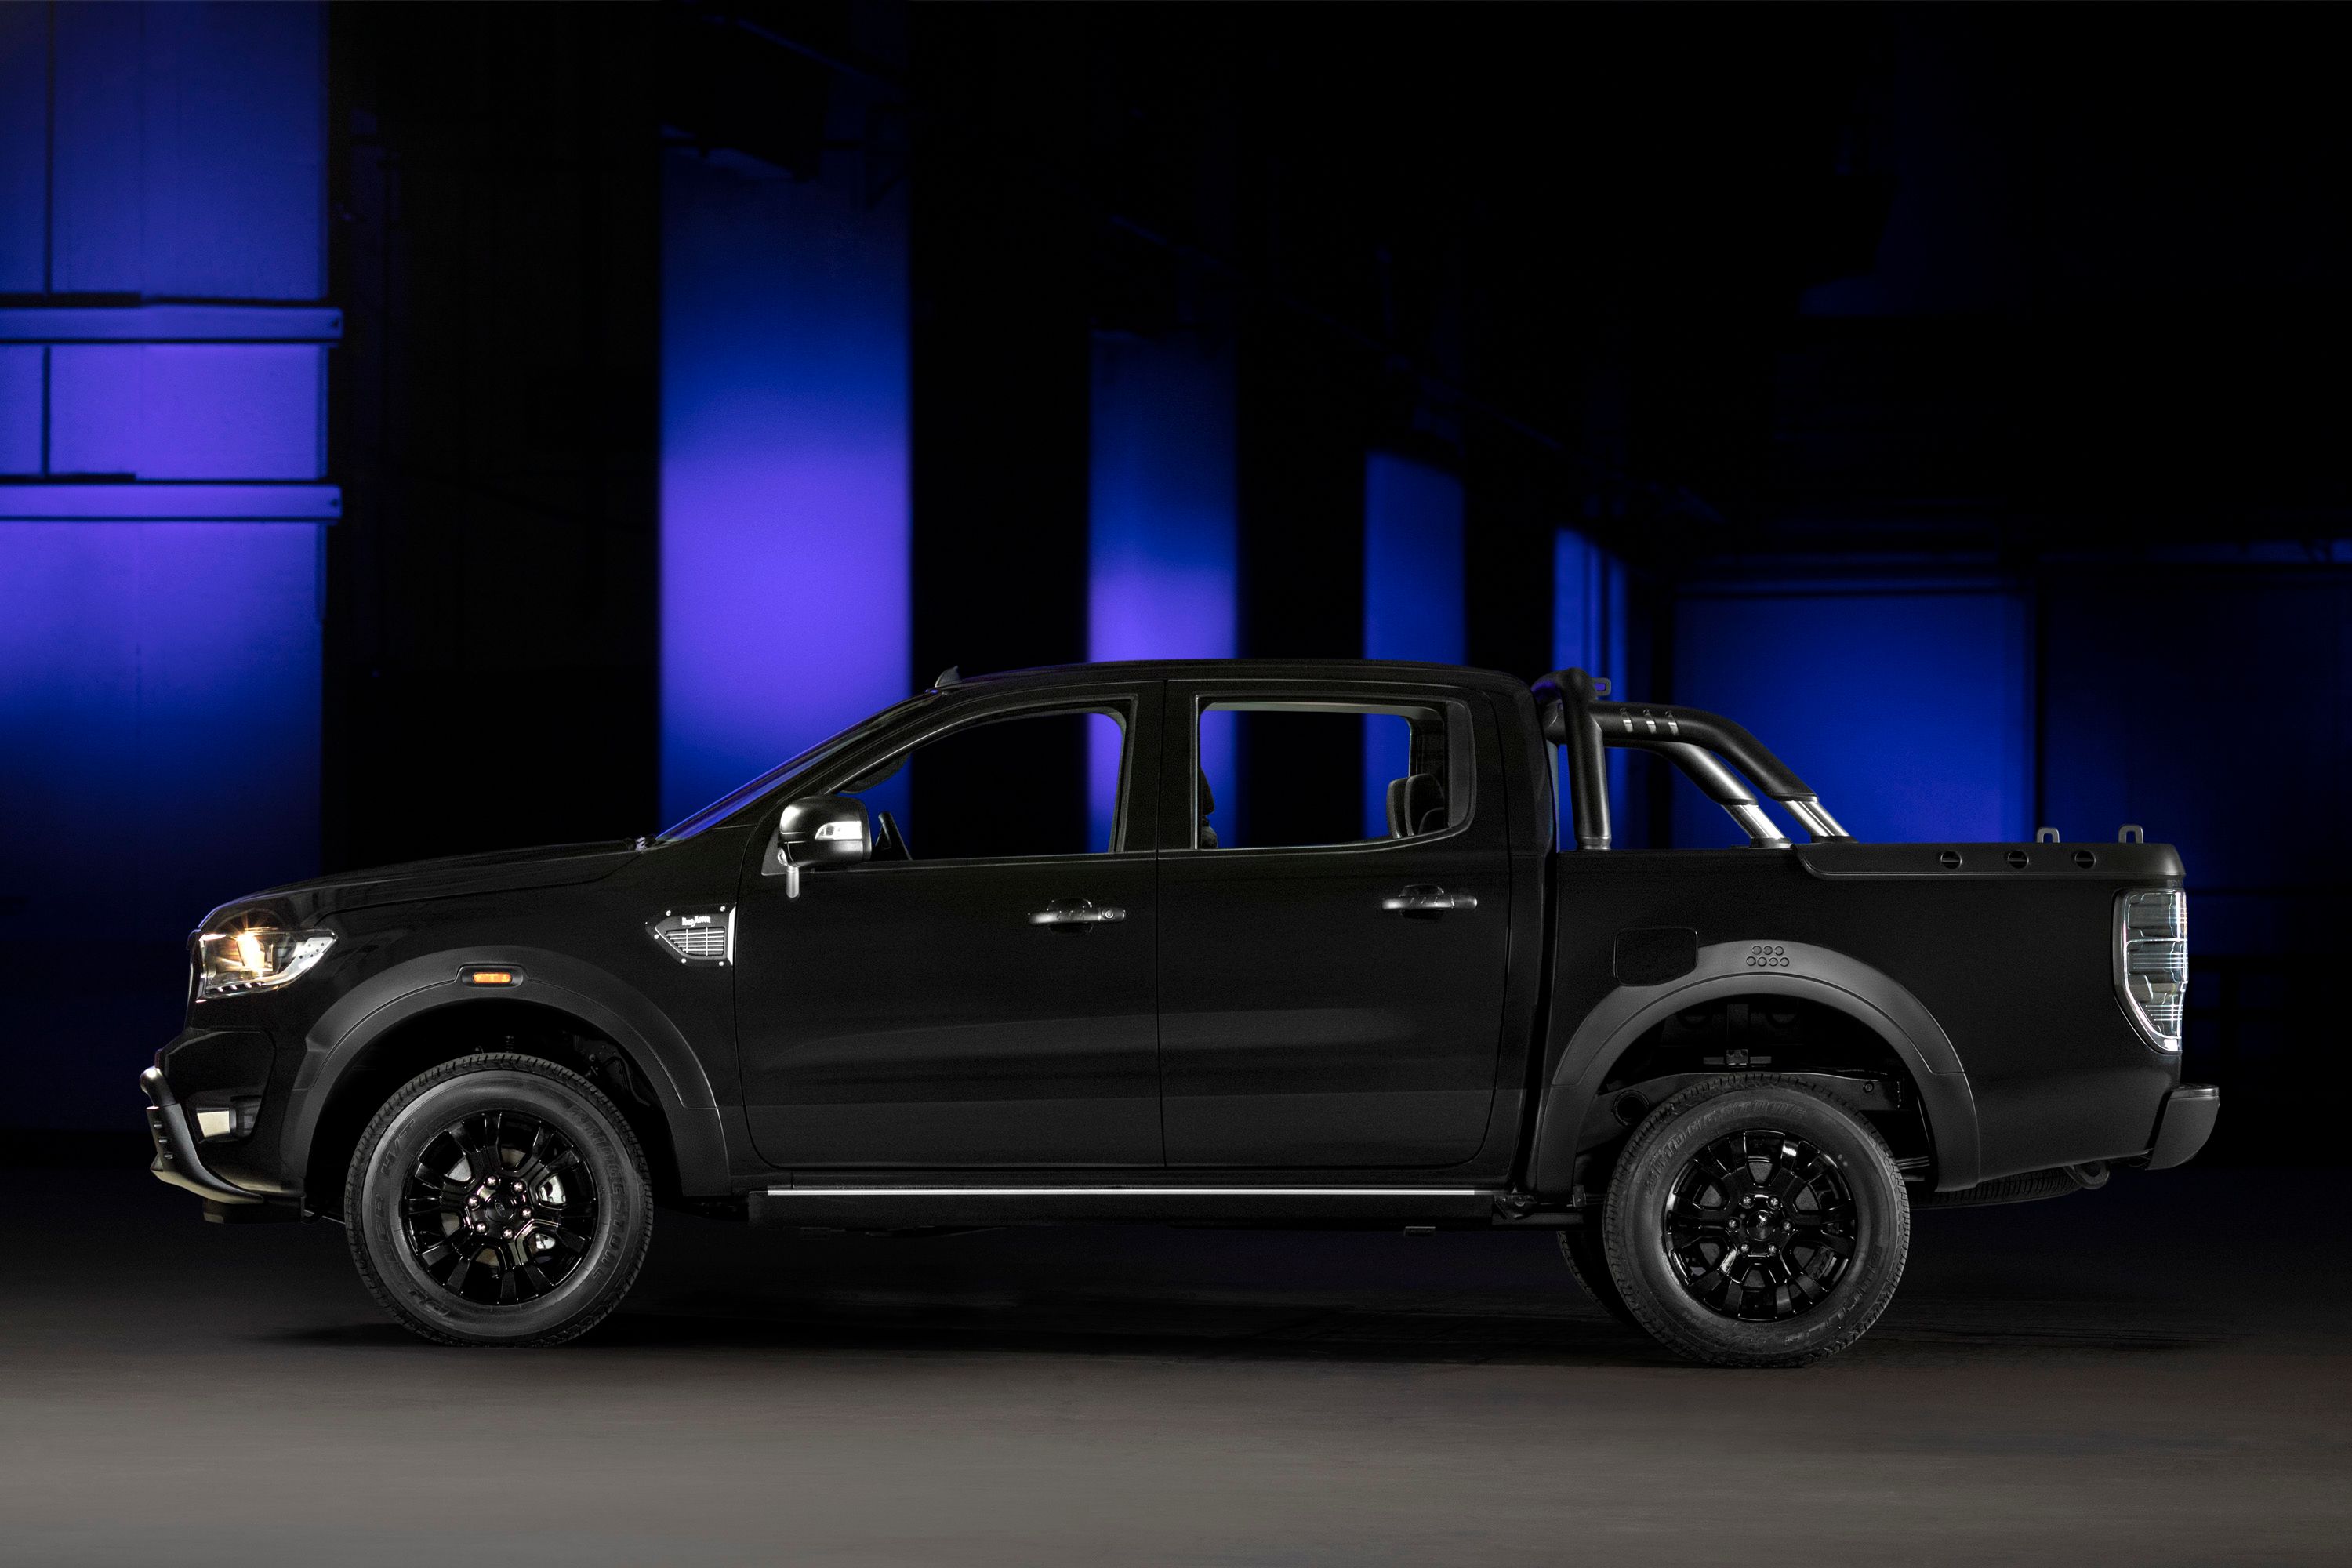 2018 Ford Ranger Storm Concept and Ford Ranger Black Edition